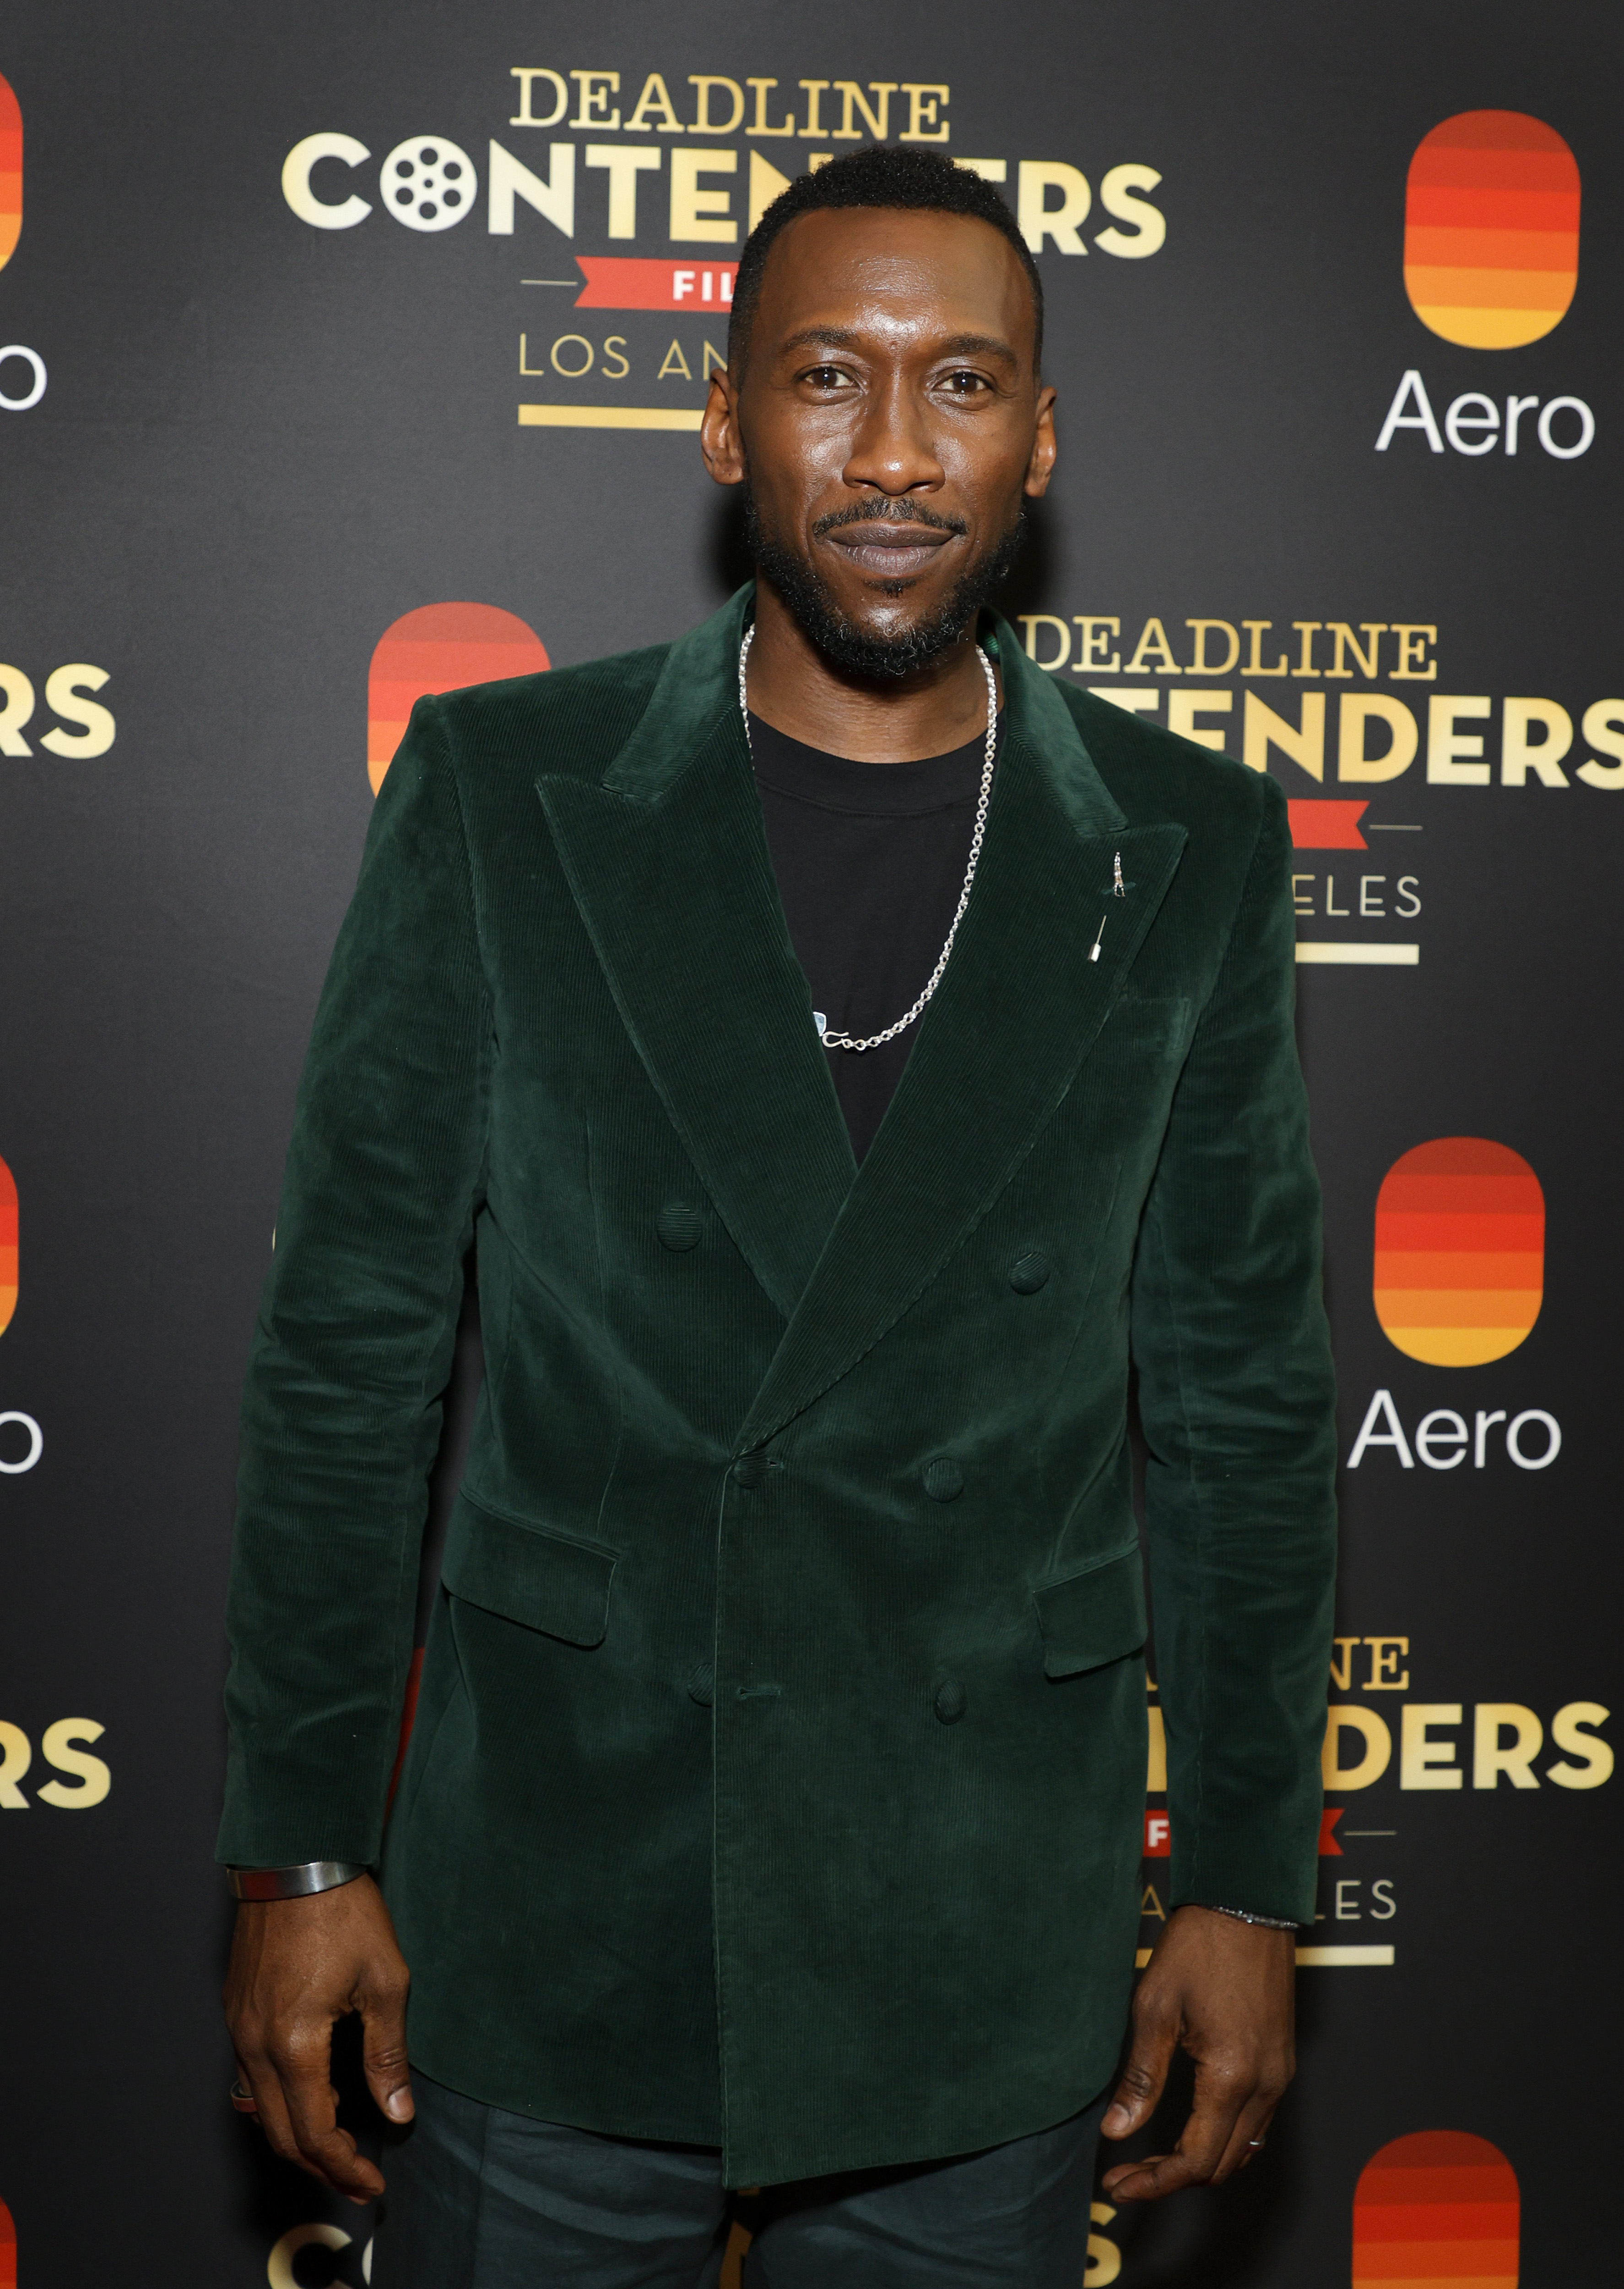 Mahershala Ali stands on red carpet event wearing formal velvet suit with lapel pin